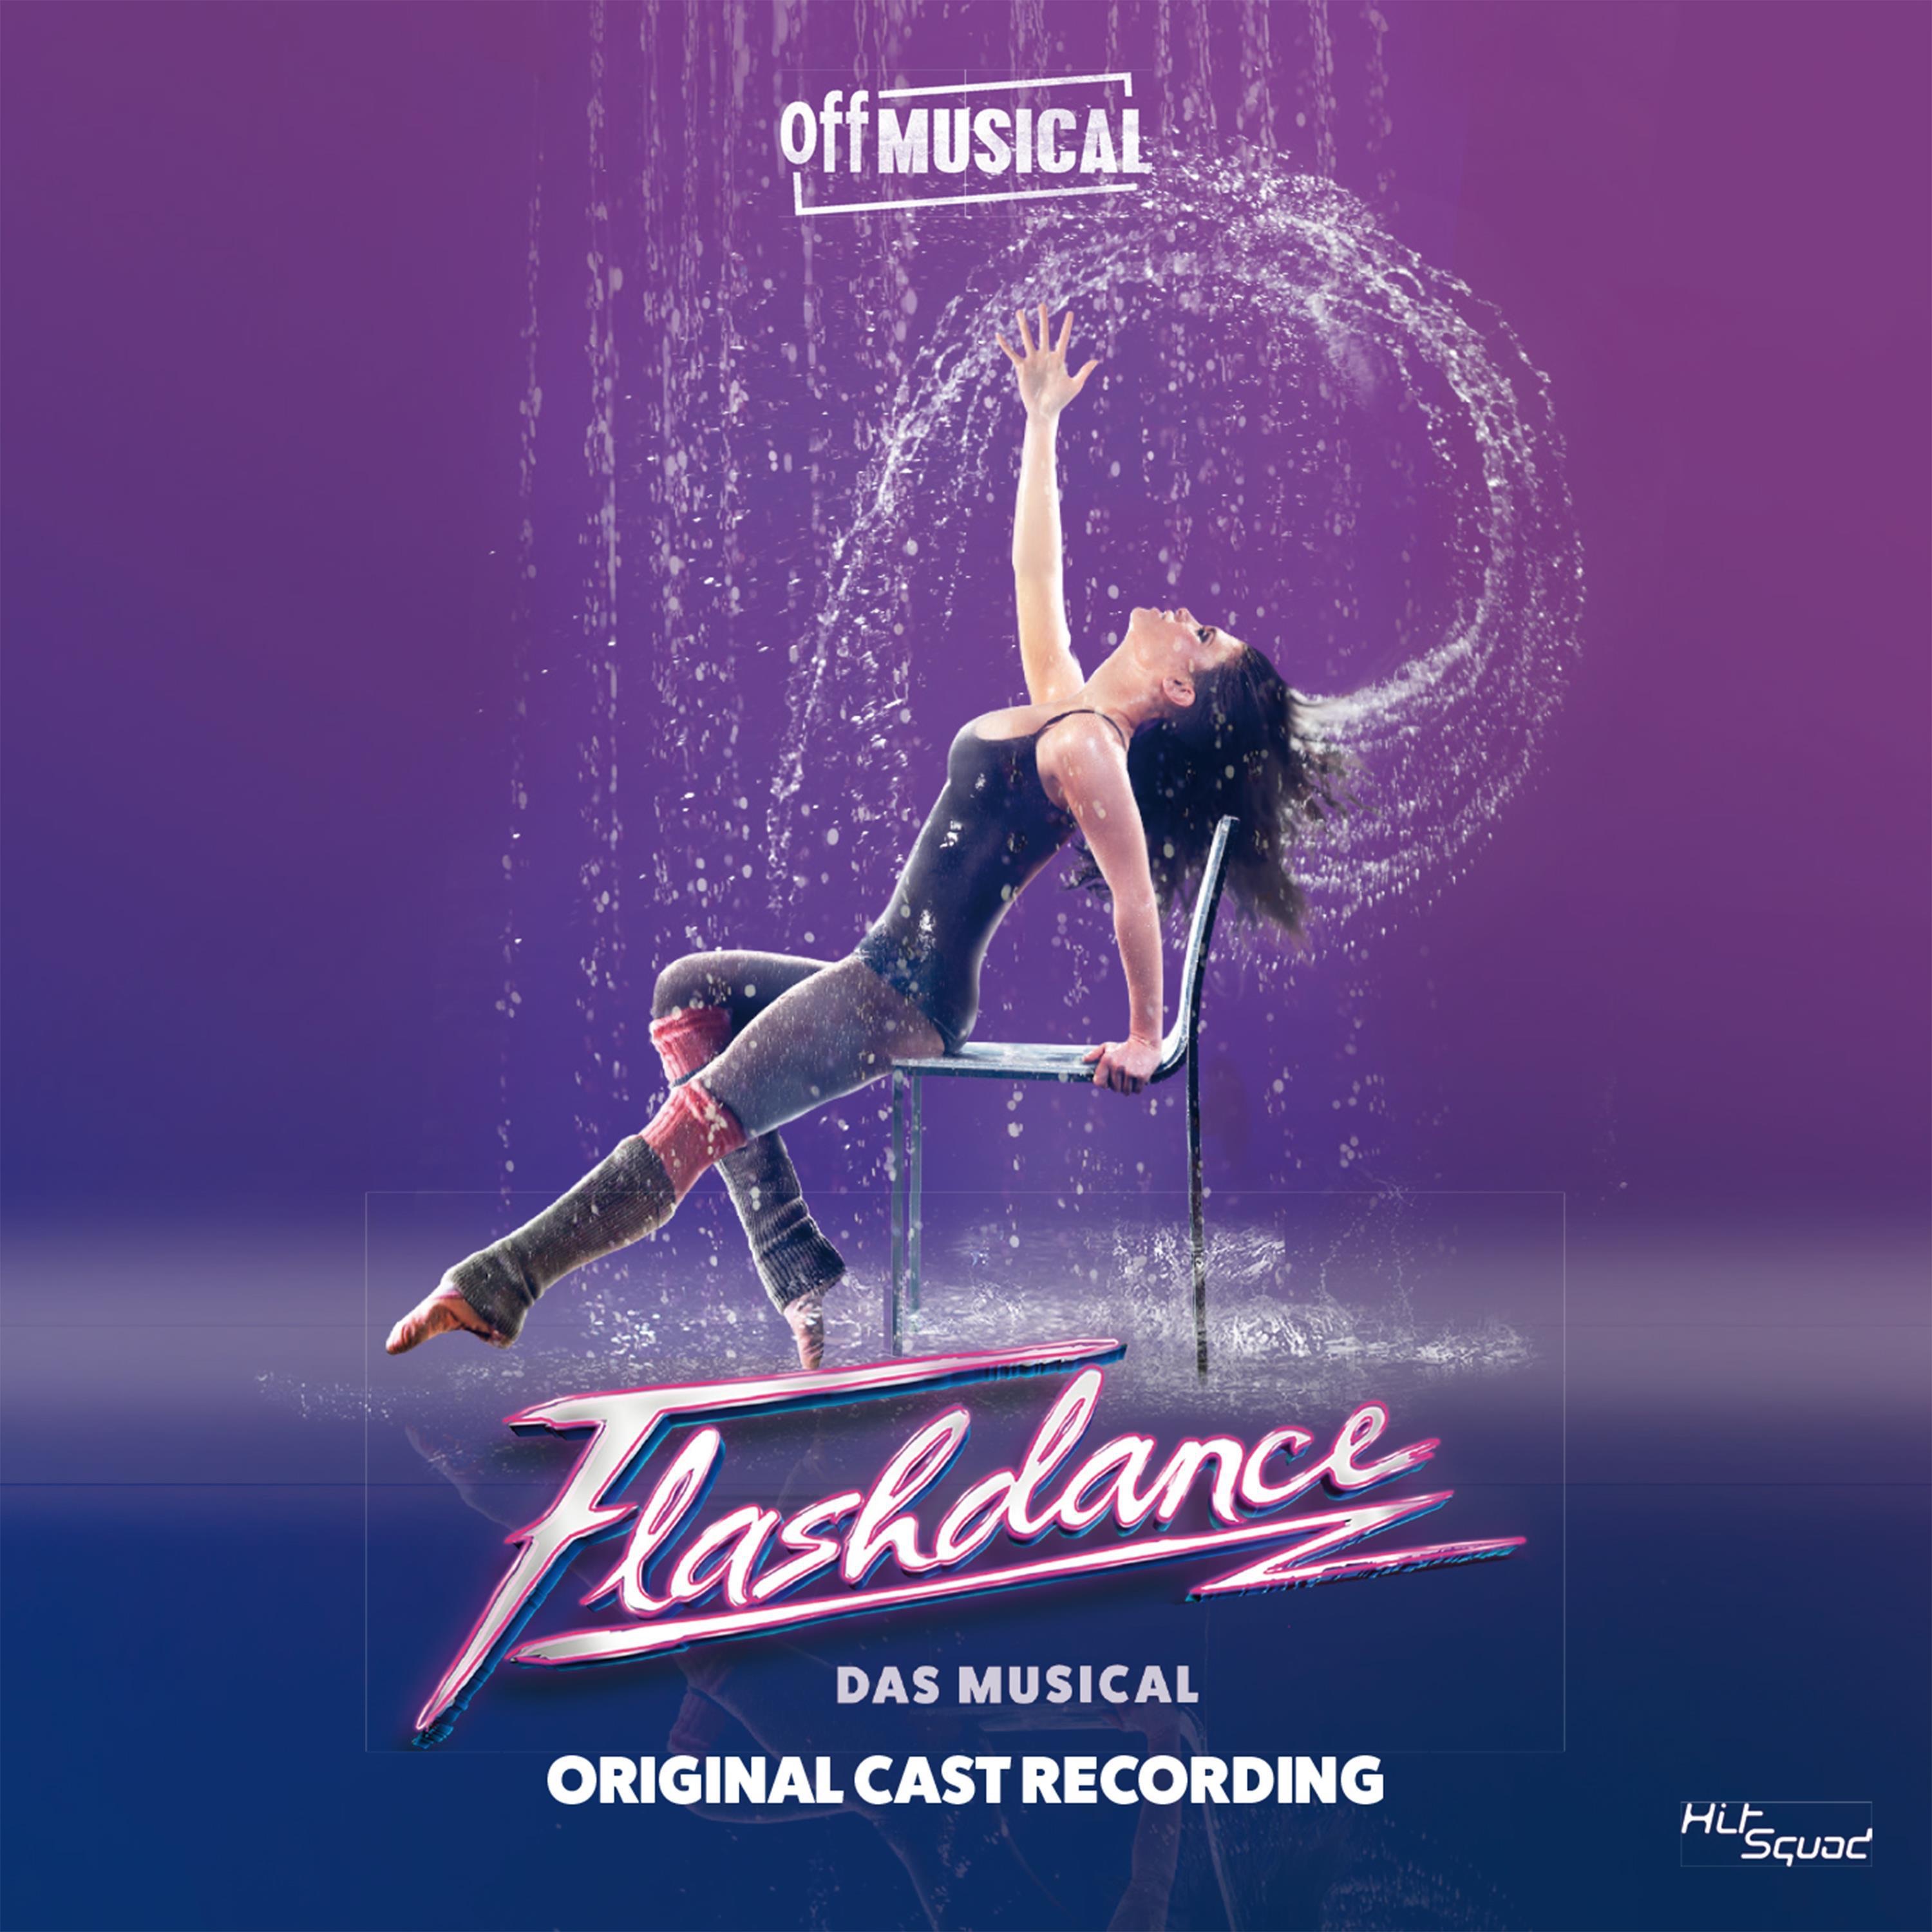 Flashdance набор музыки. Flashdance poster. Flashdance - Original Soundtrack from the Motion picture. Flashdance what a feeling